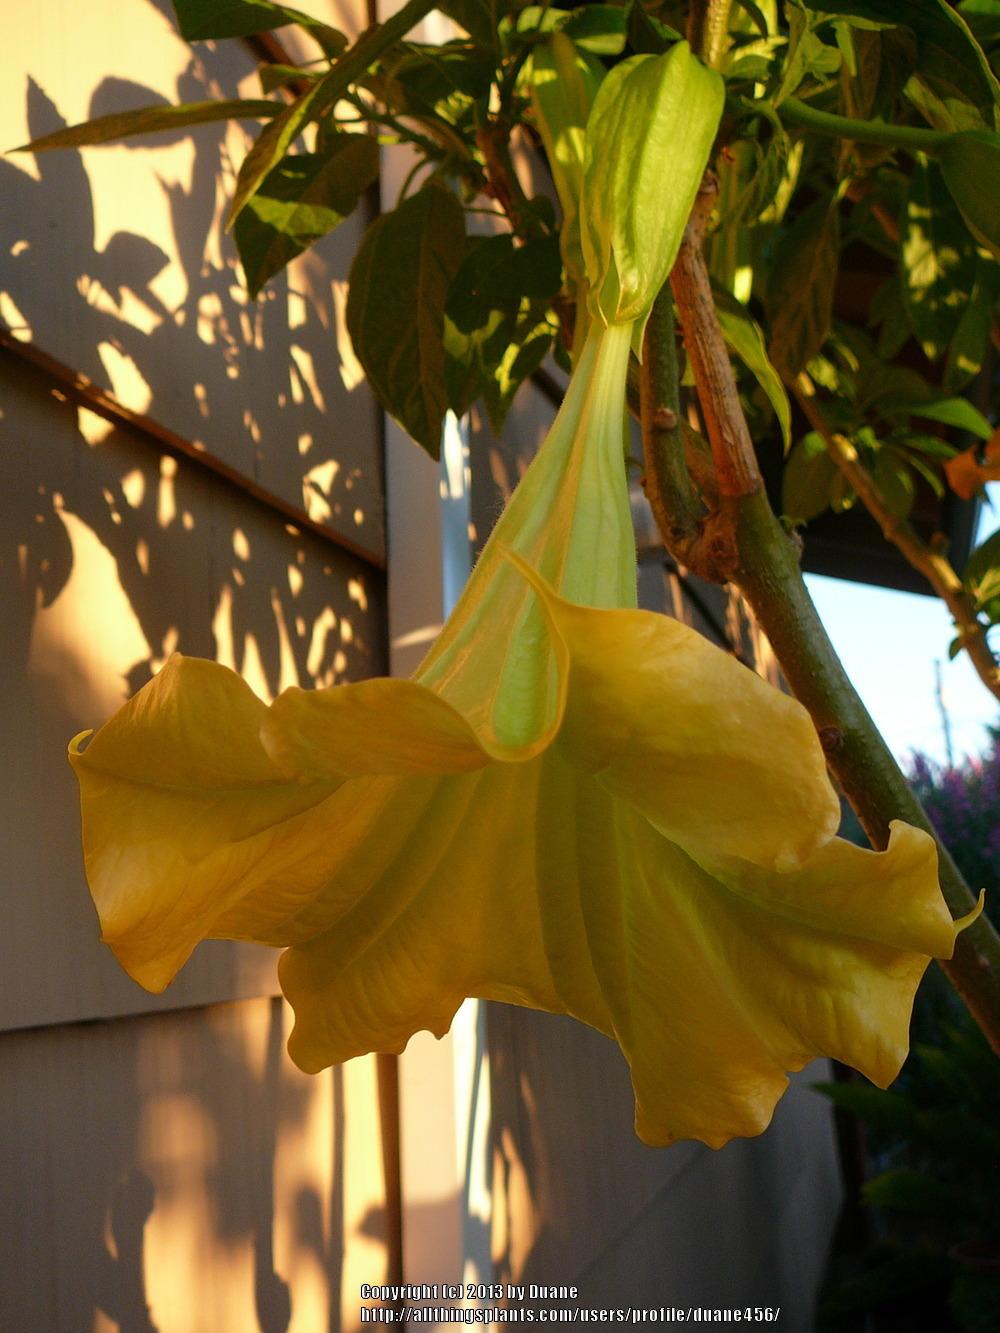 Photo of Angel Trumpet (Brugmansia 'Tropical Sunset') uploaded by duane456